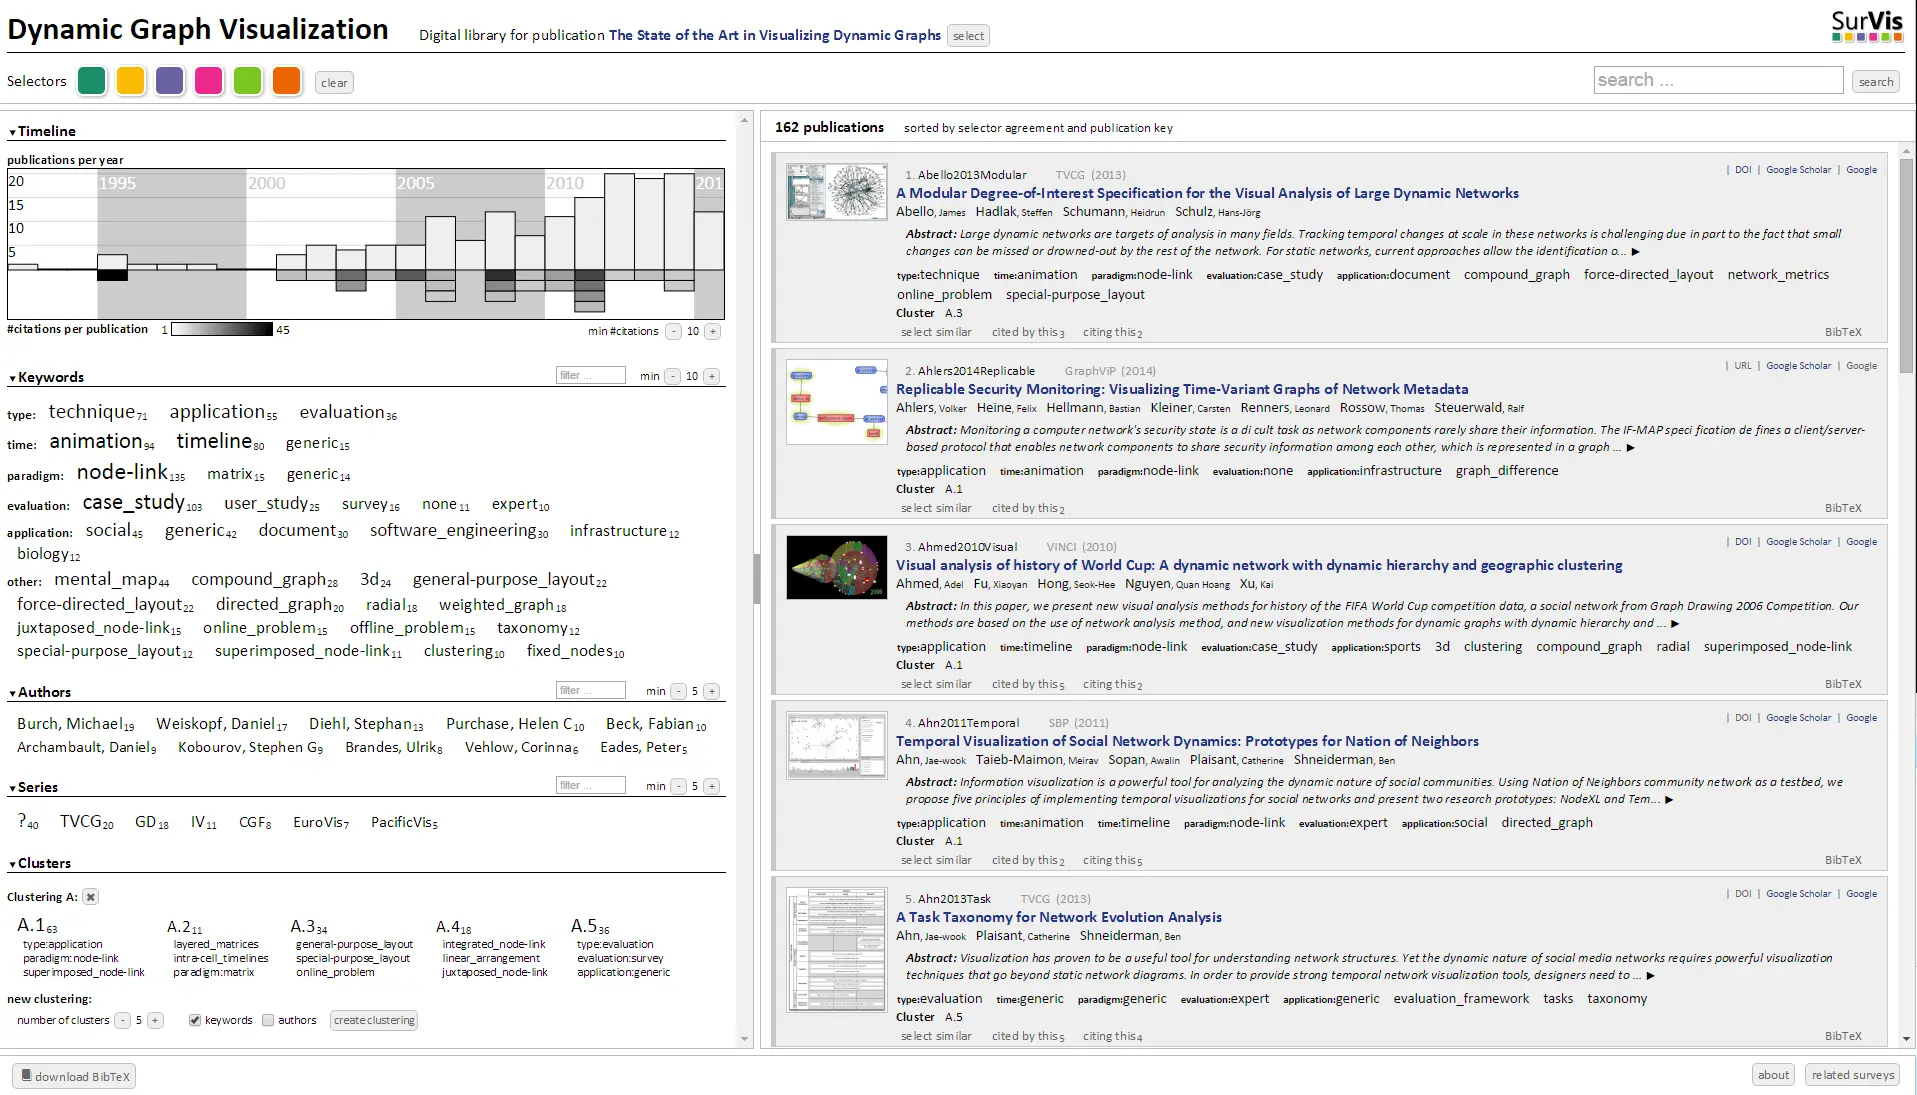 Interface of SurVis showing a literature collection on dynamic graph visualization.